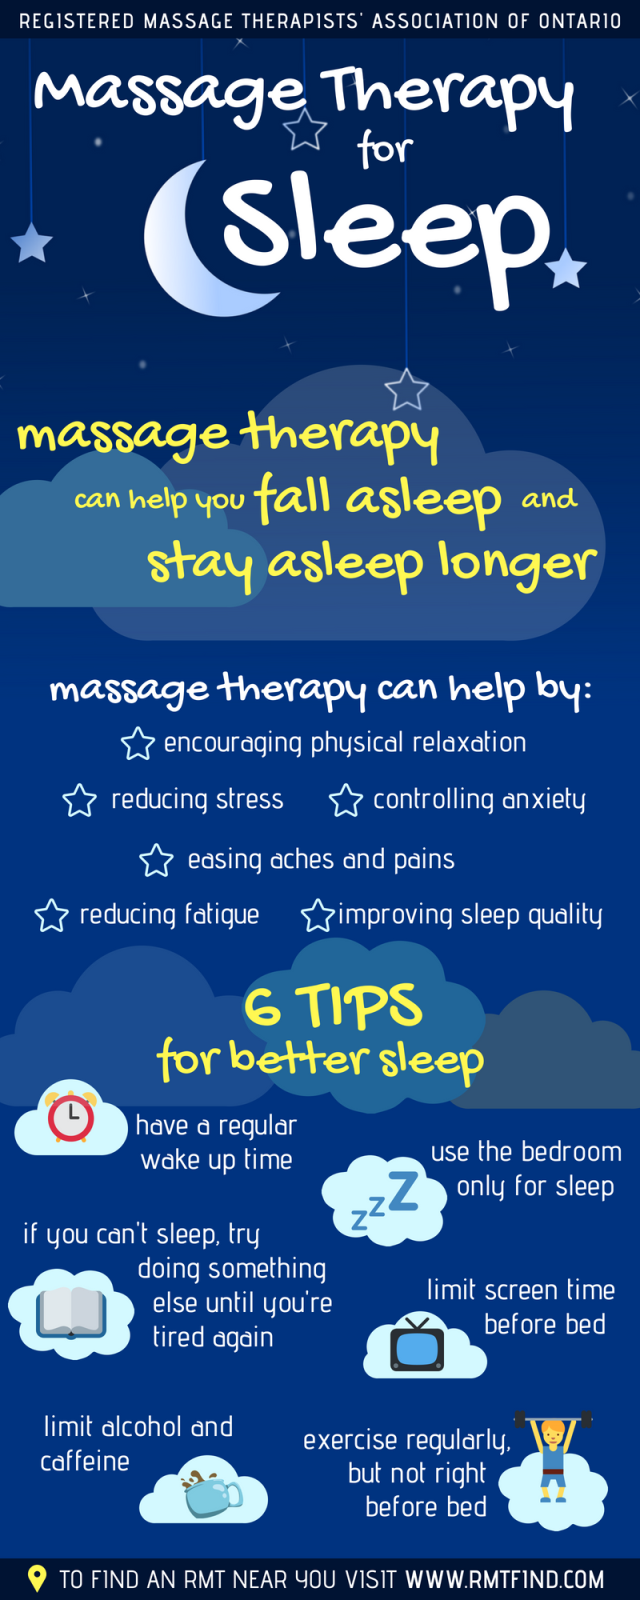 Massage Therapy for Sleep